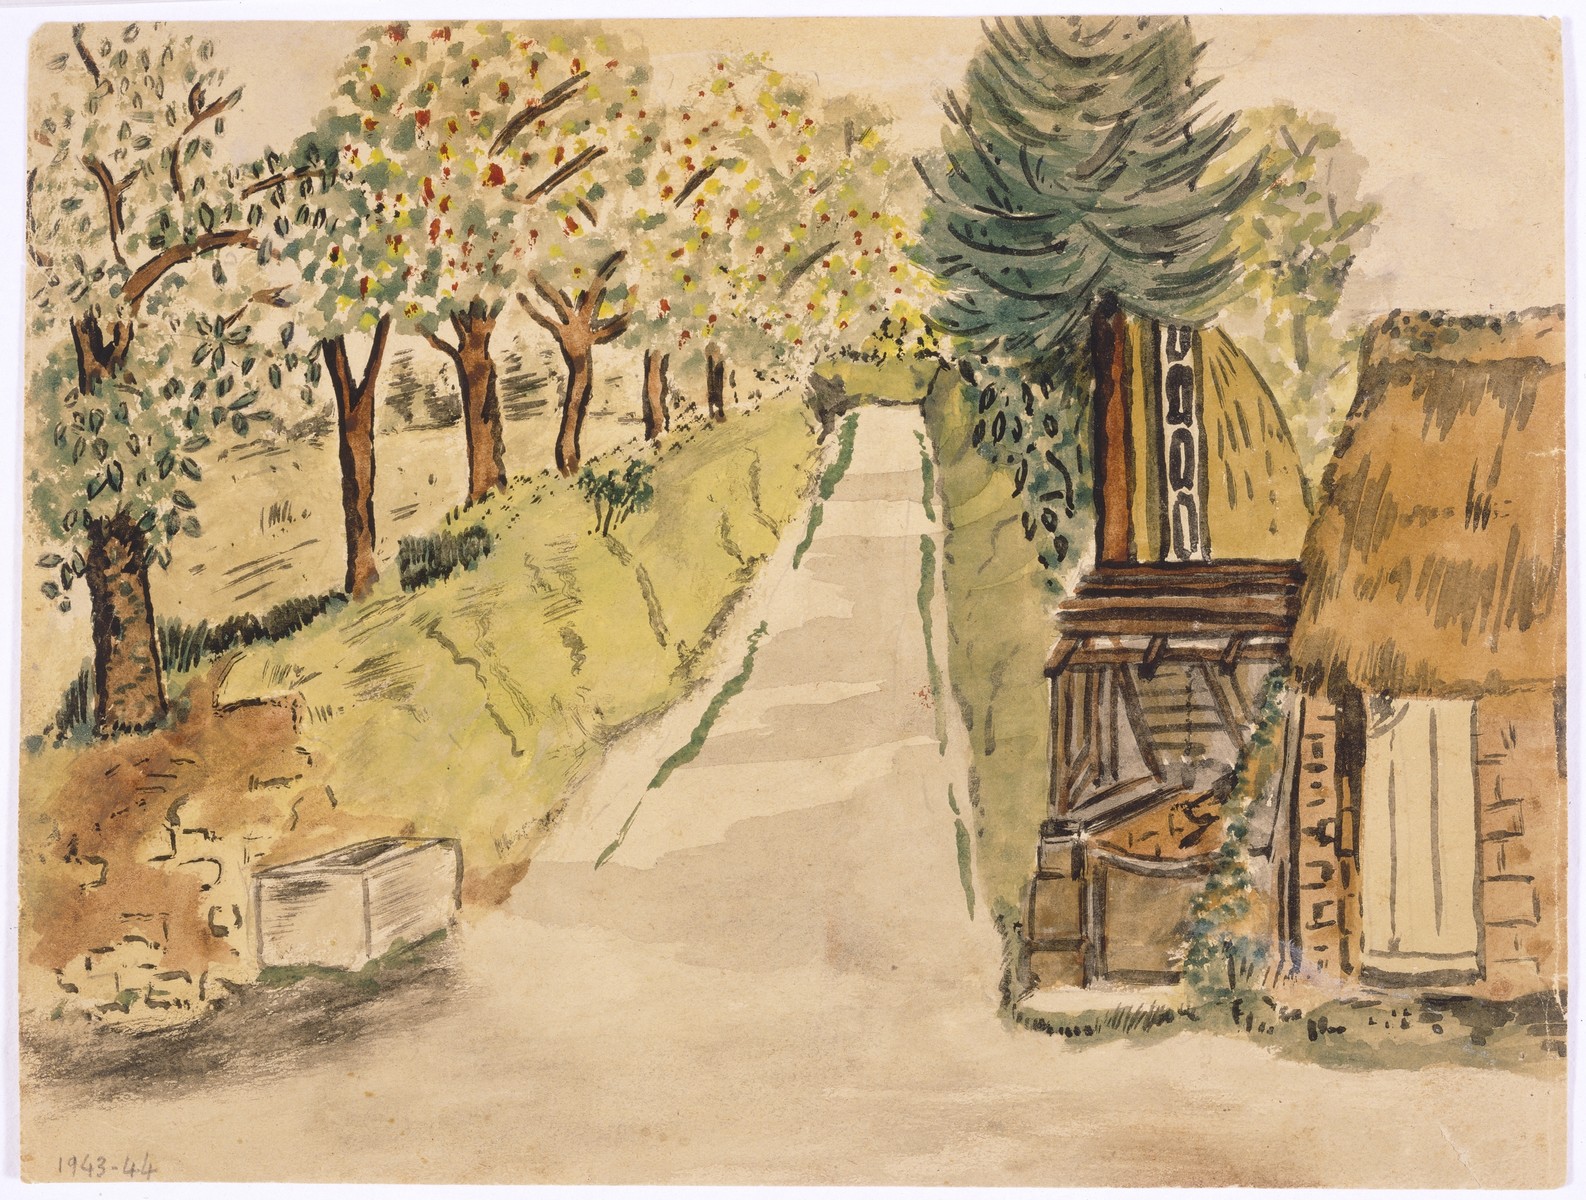 Watercolor painting by Simon Jeruchim.

The painting depicts a road in La Renouardiere, near the home of the artist's rescuer, Madame Prim.  The road led to the village.  An apple orchard is pictured on the left, and a well where they fetched water for their daily needs is seen on the right.